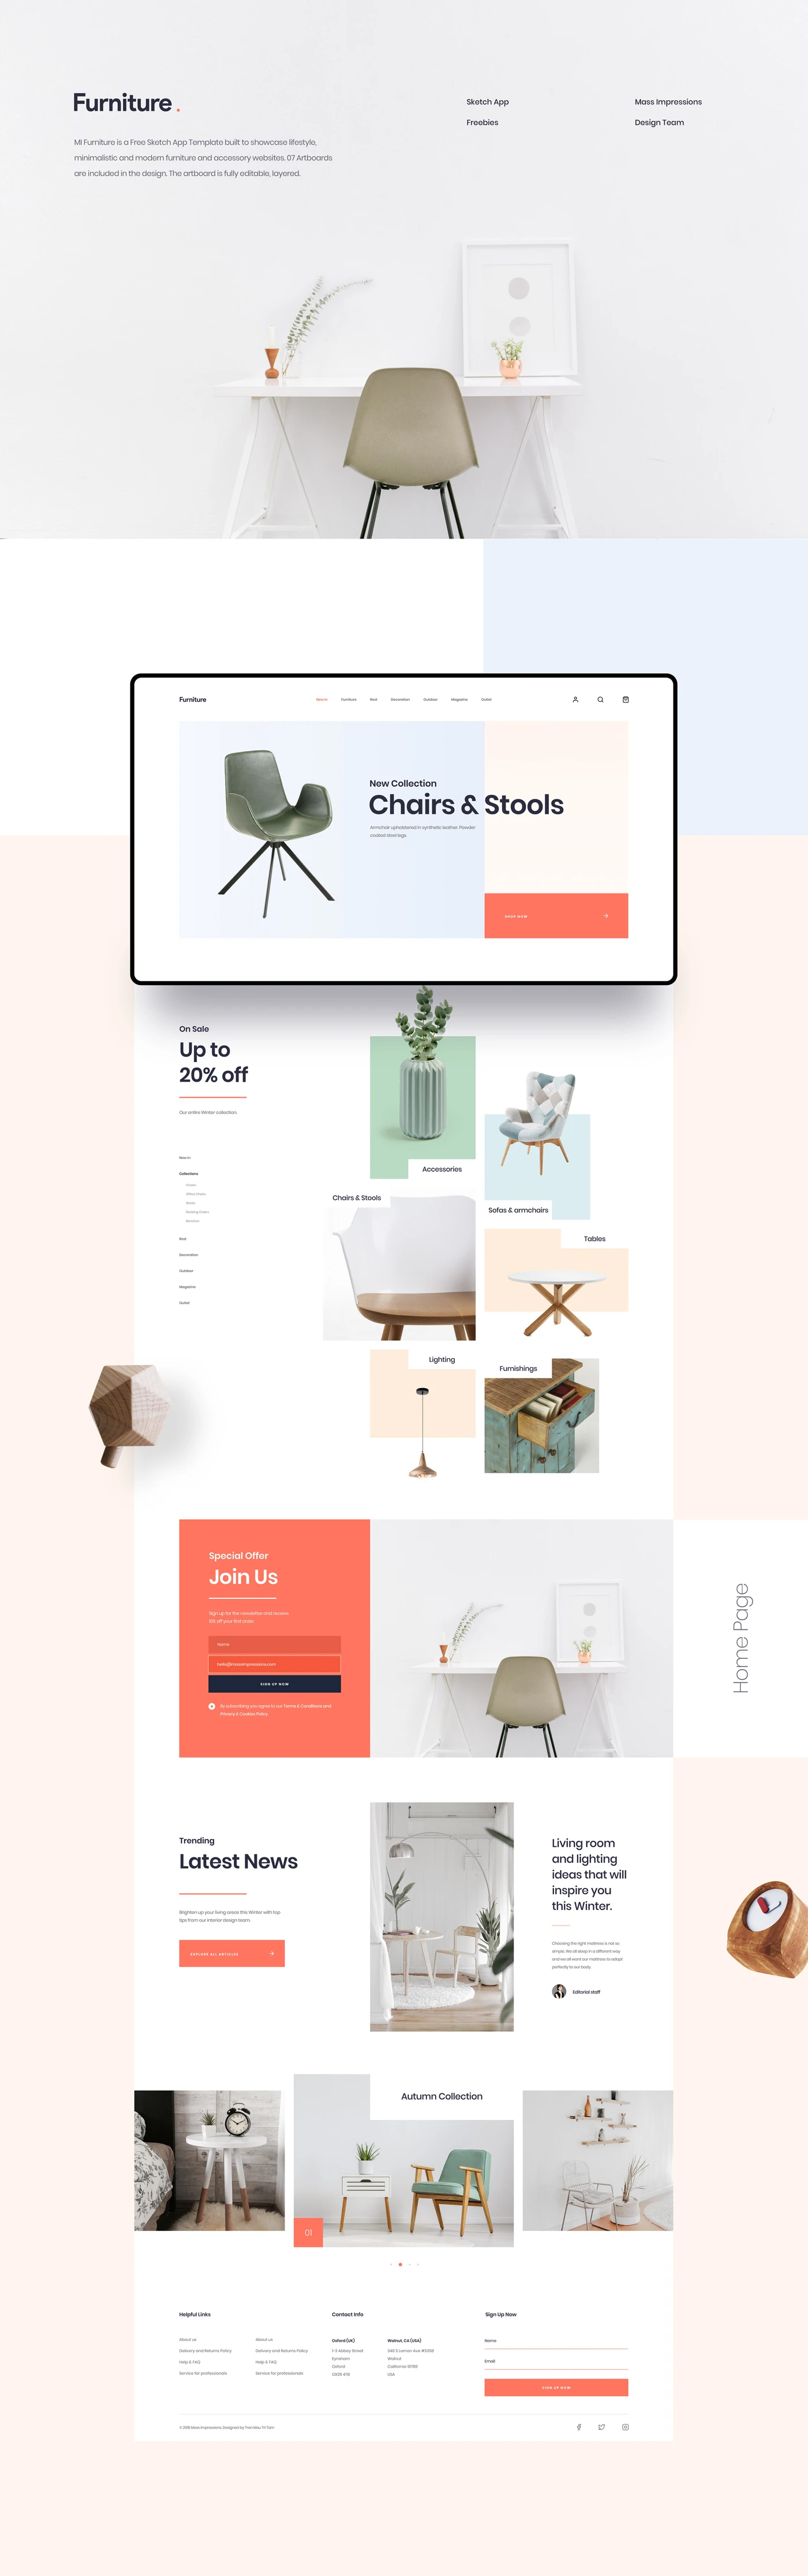 MI Furniture Free Sketch Template - MI Furniture is a Free Multi-Purpose Sketch App Template built to showcase lifestyle, minimalistic and modern furniture and accessory websites. 07 Artboards are included in the design. The artboard is fully editable, layered, carefully organized.